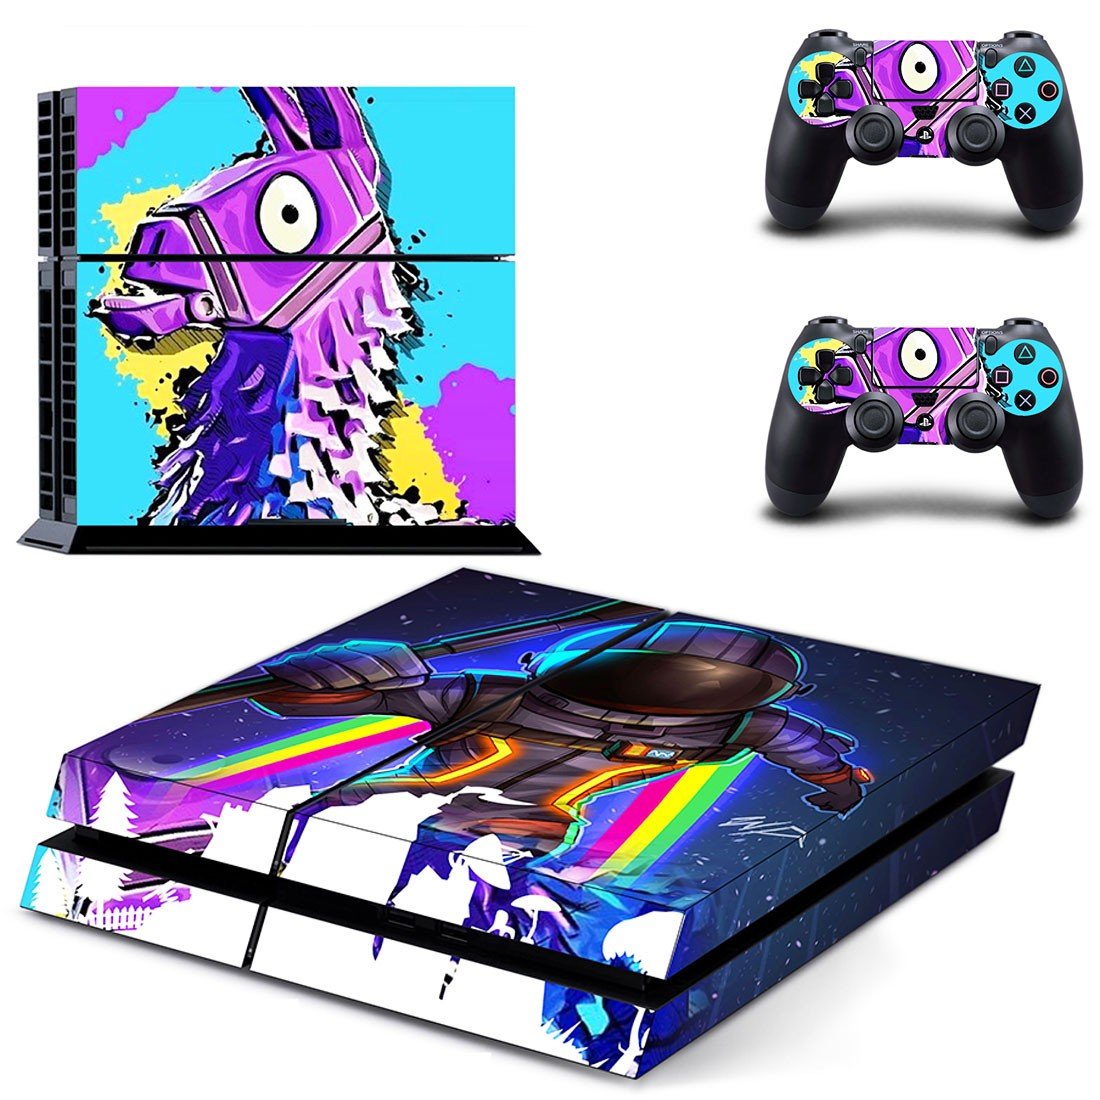 fortnite controller for ps4